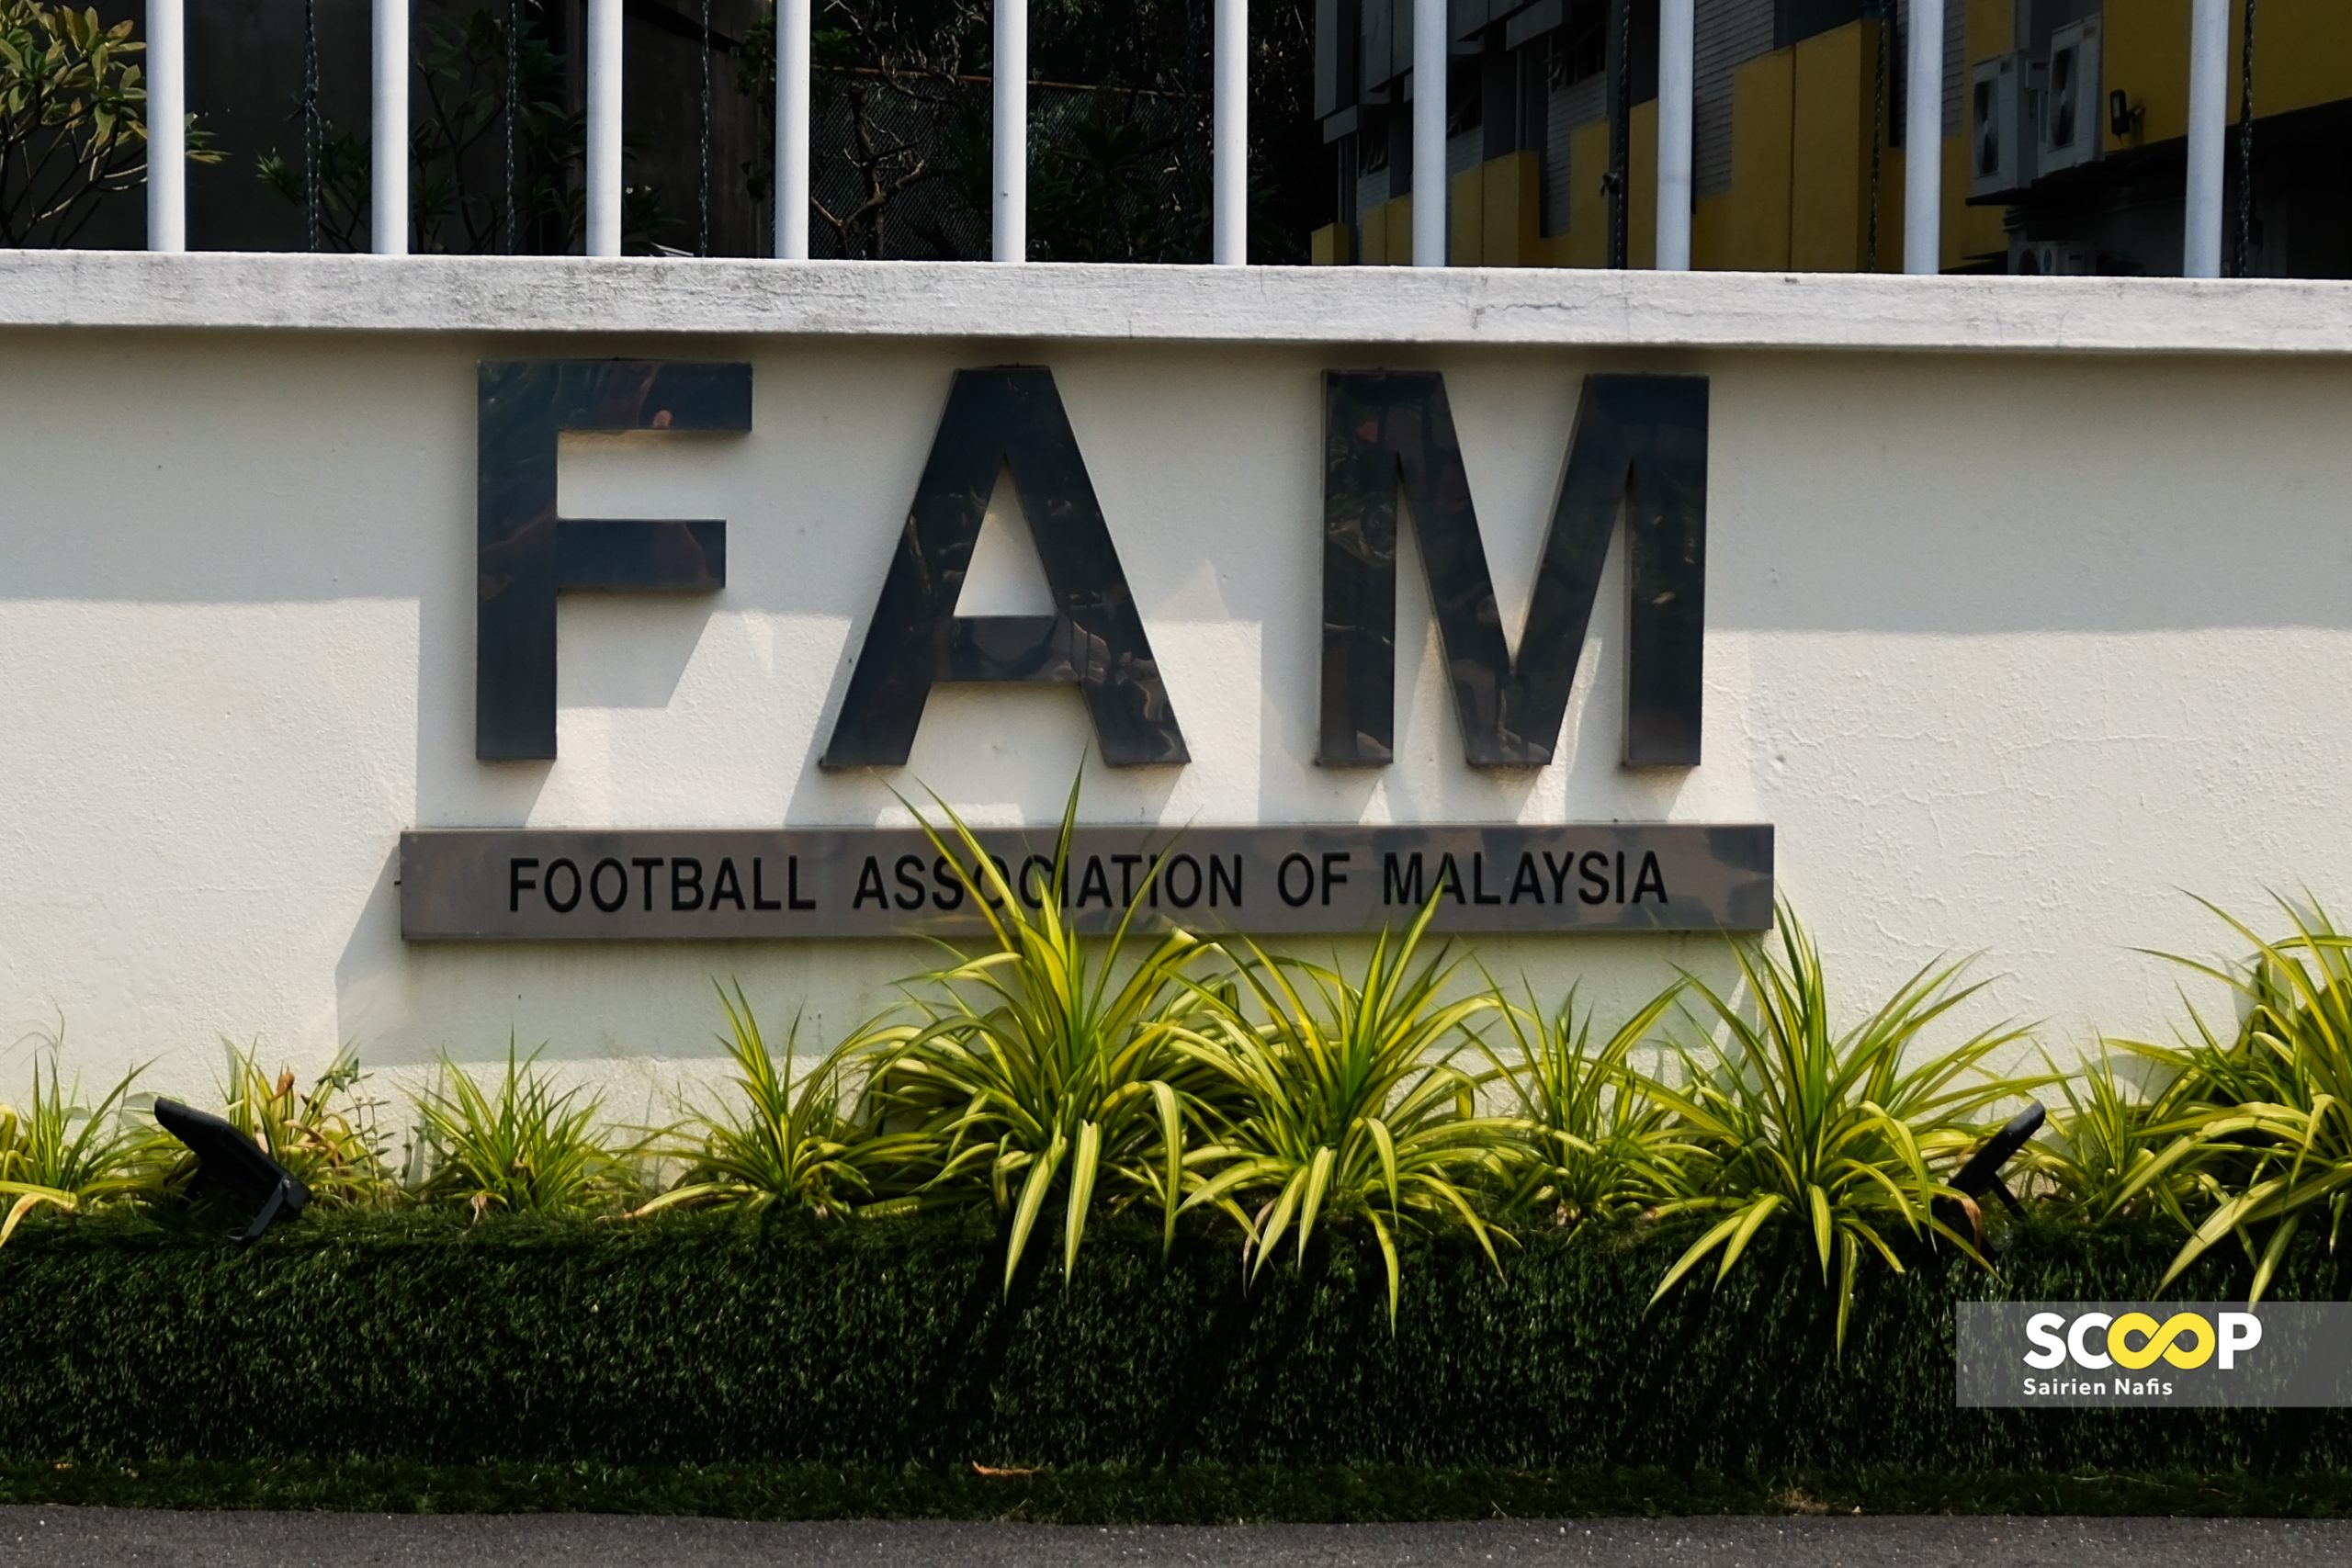 FAM received RM35 mil through FIFA’s Forward Development Programme, says report 